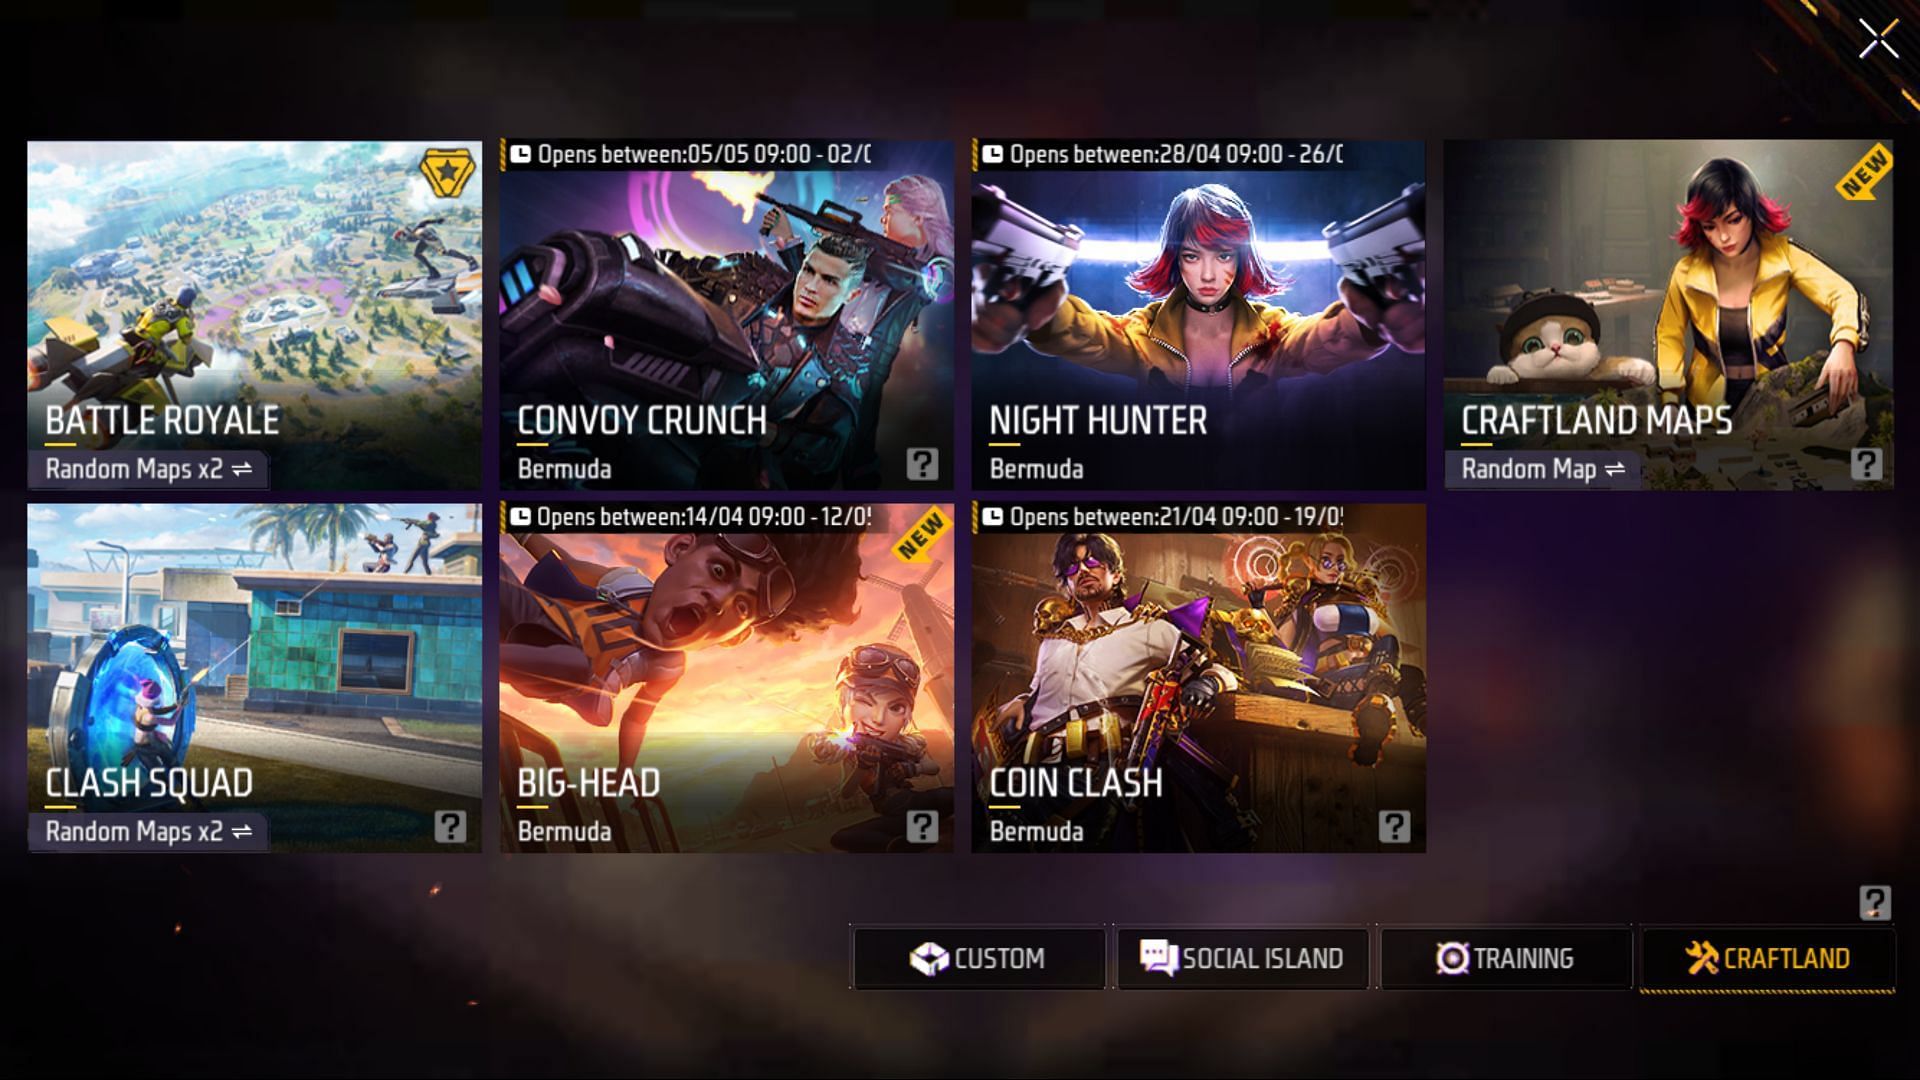 Select the Convoy Crunch option and accumulate playtime (Image via Garena)